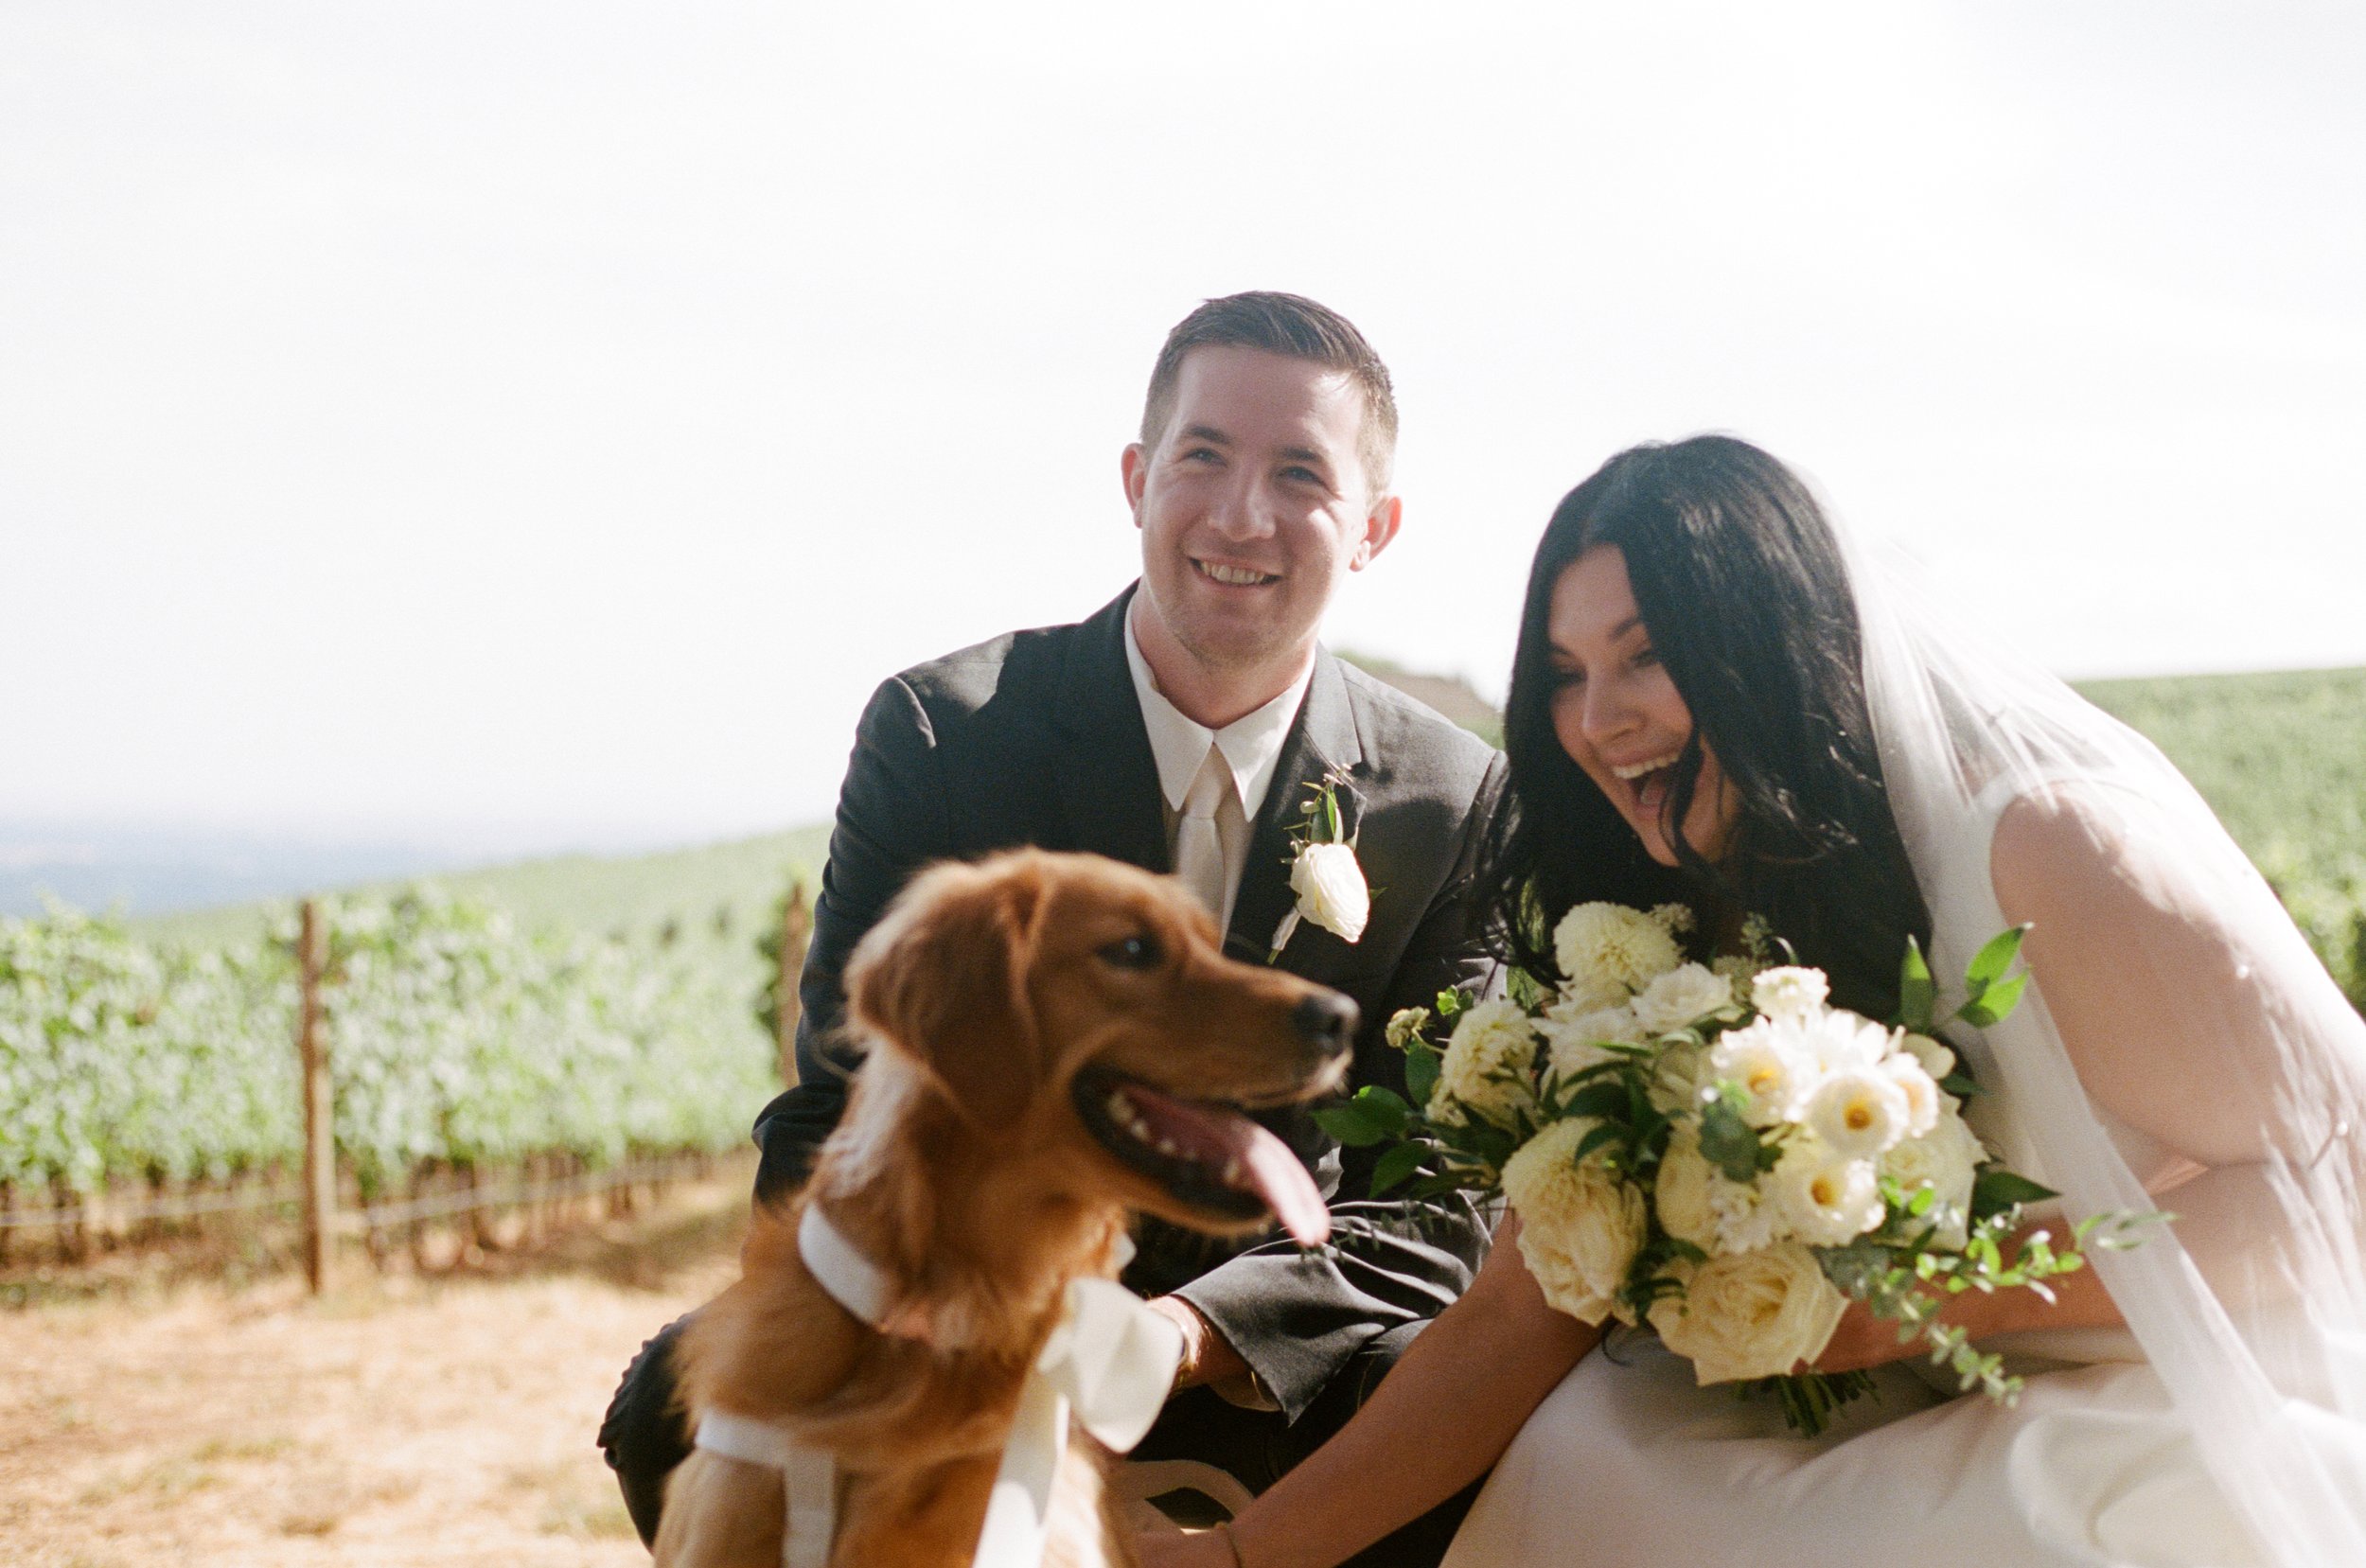 man and woman smiling while petting dog for wedding photos. Wedding photographer in Oregon